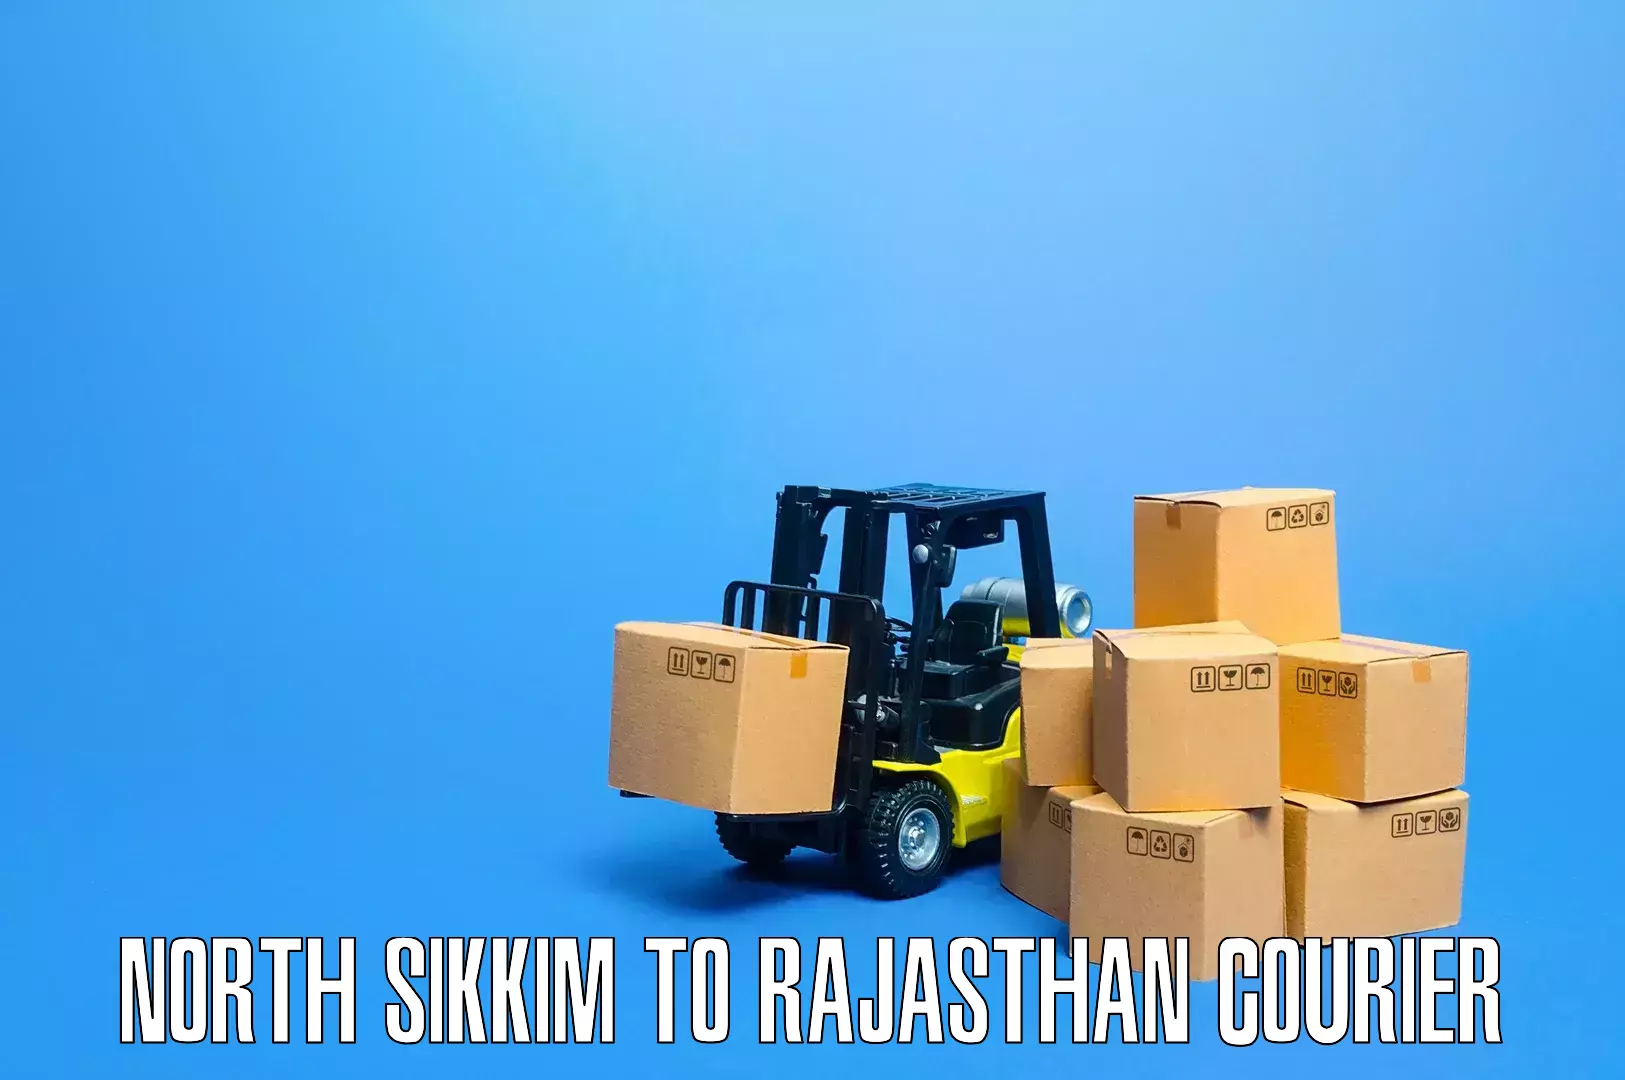 Quality relocation services North Sikkim to Rajasthan